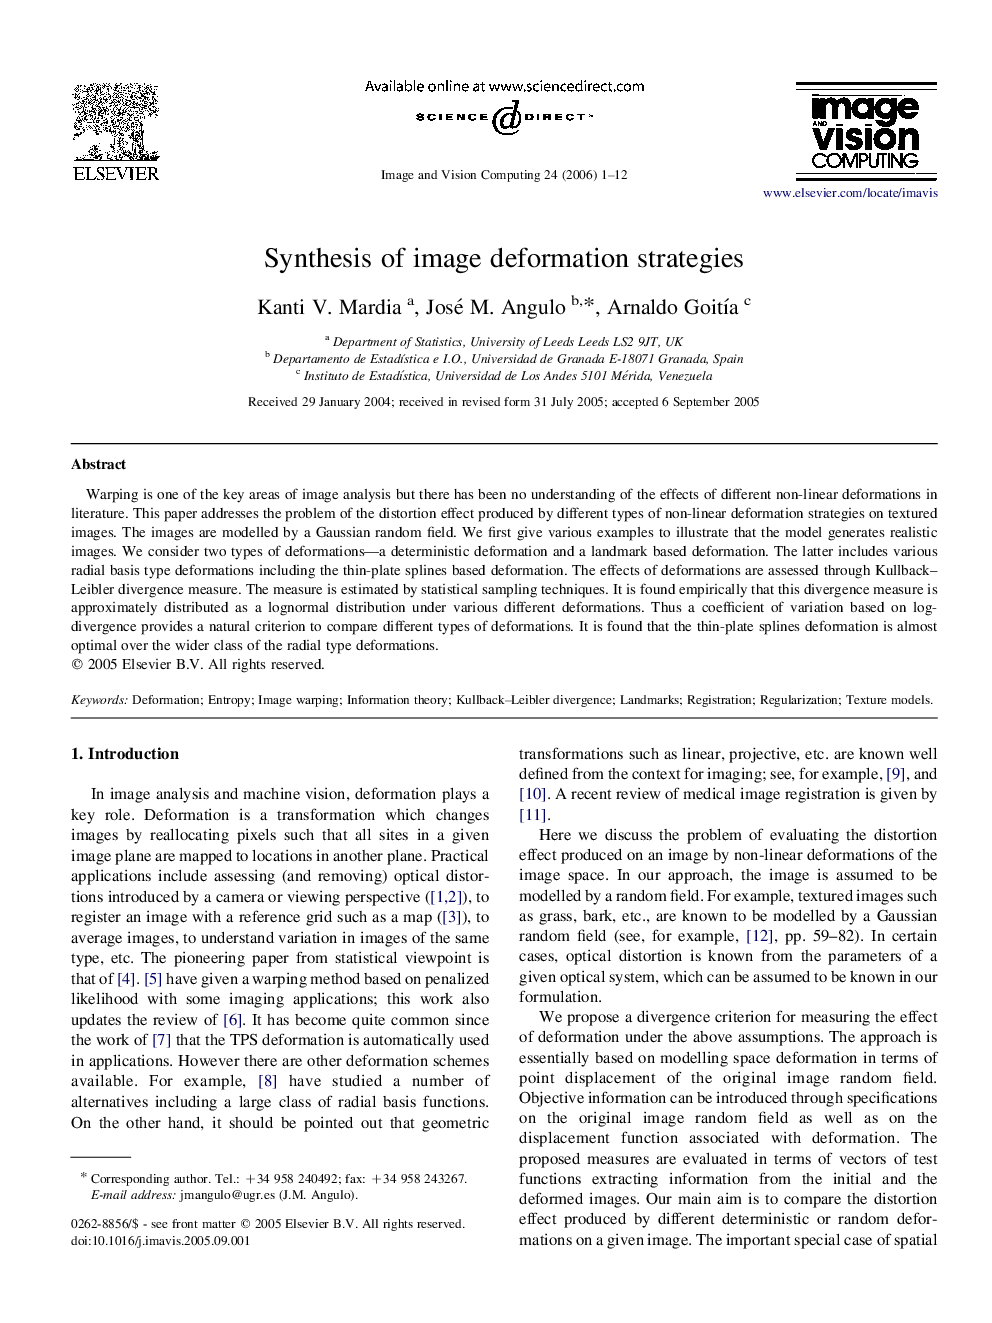 Synthesis of image deformation strategies